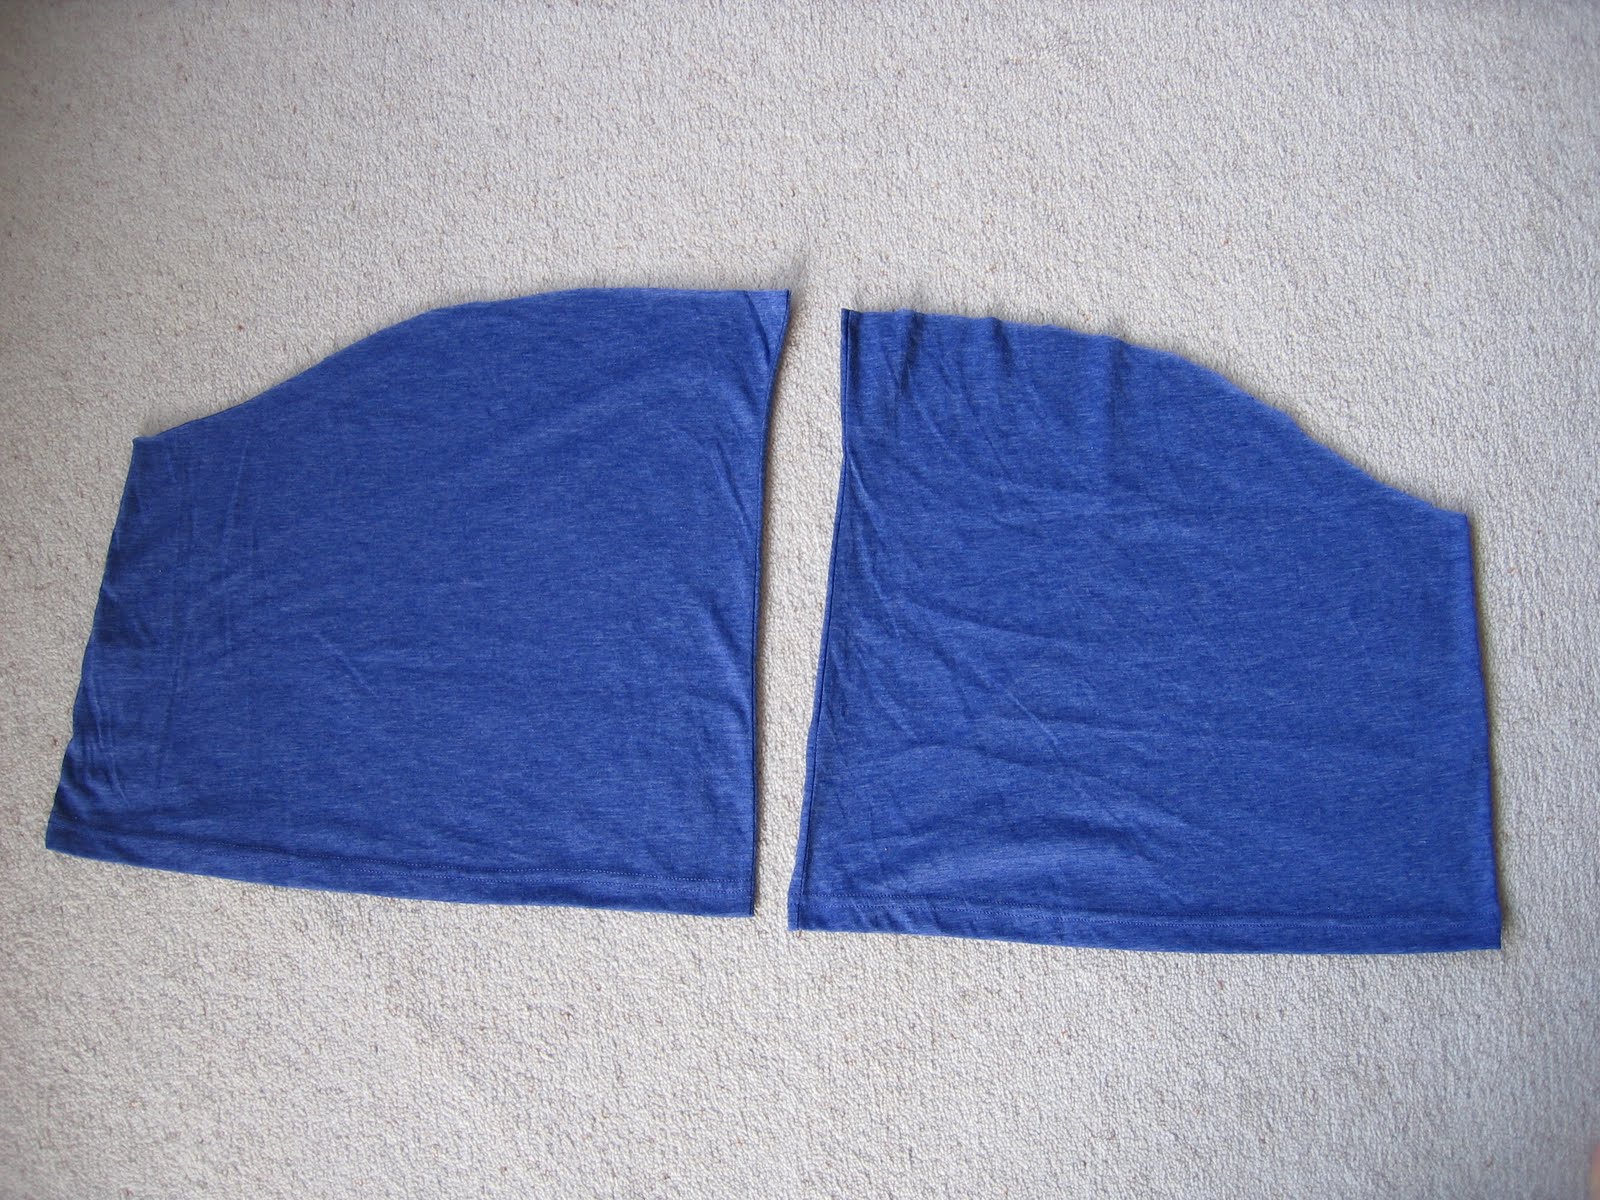 Seamless: Tutorial 7 - Sew Puffed Sleeves onto Vest Top